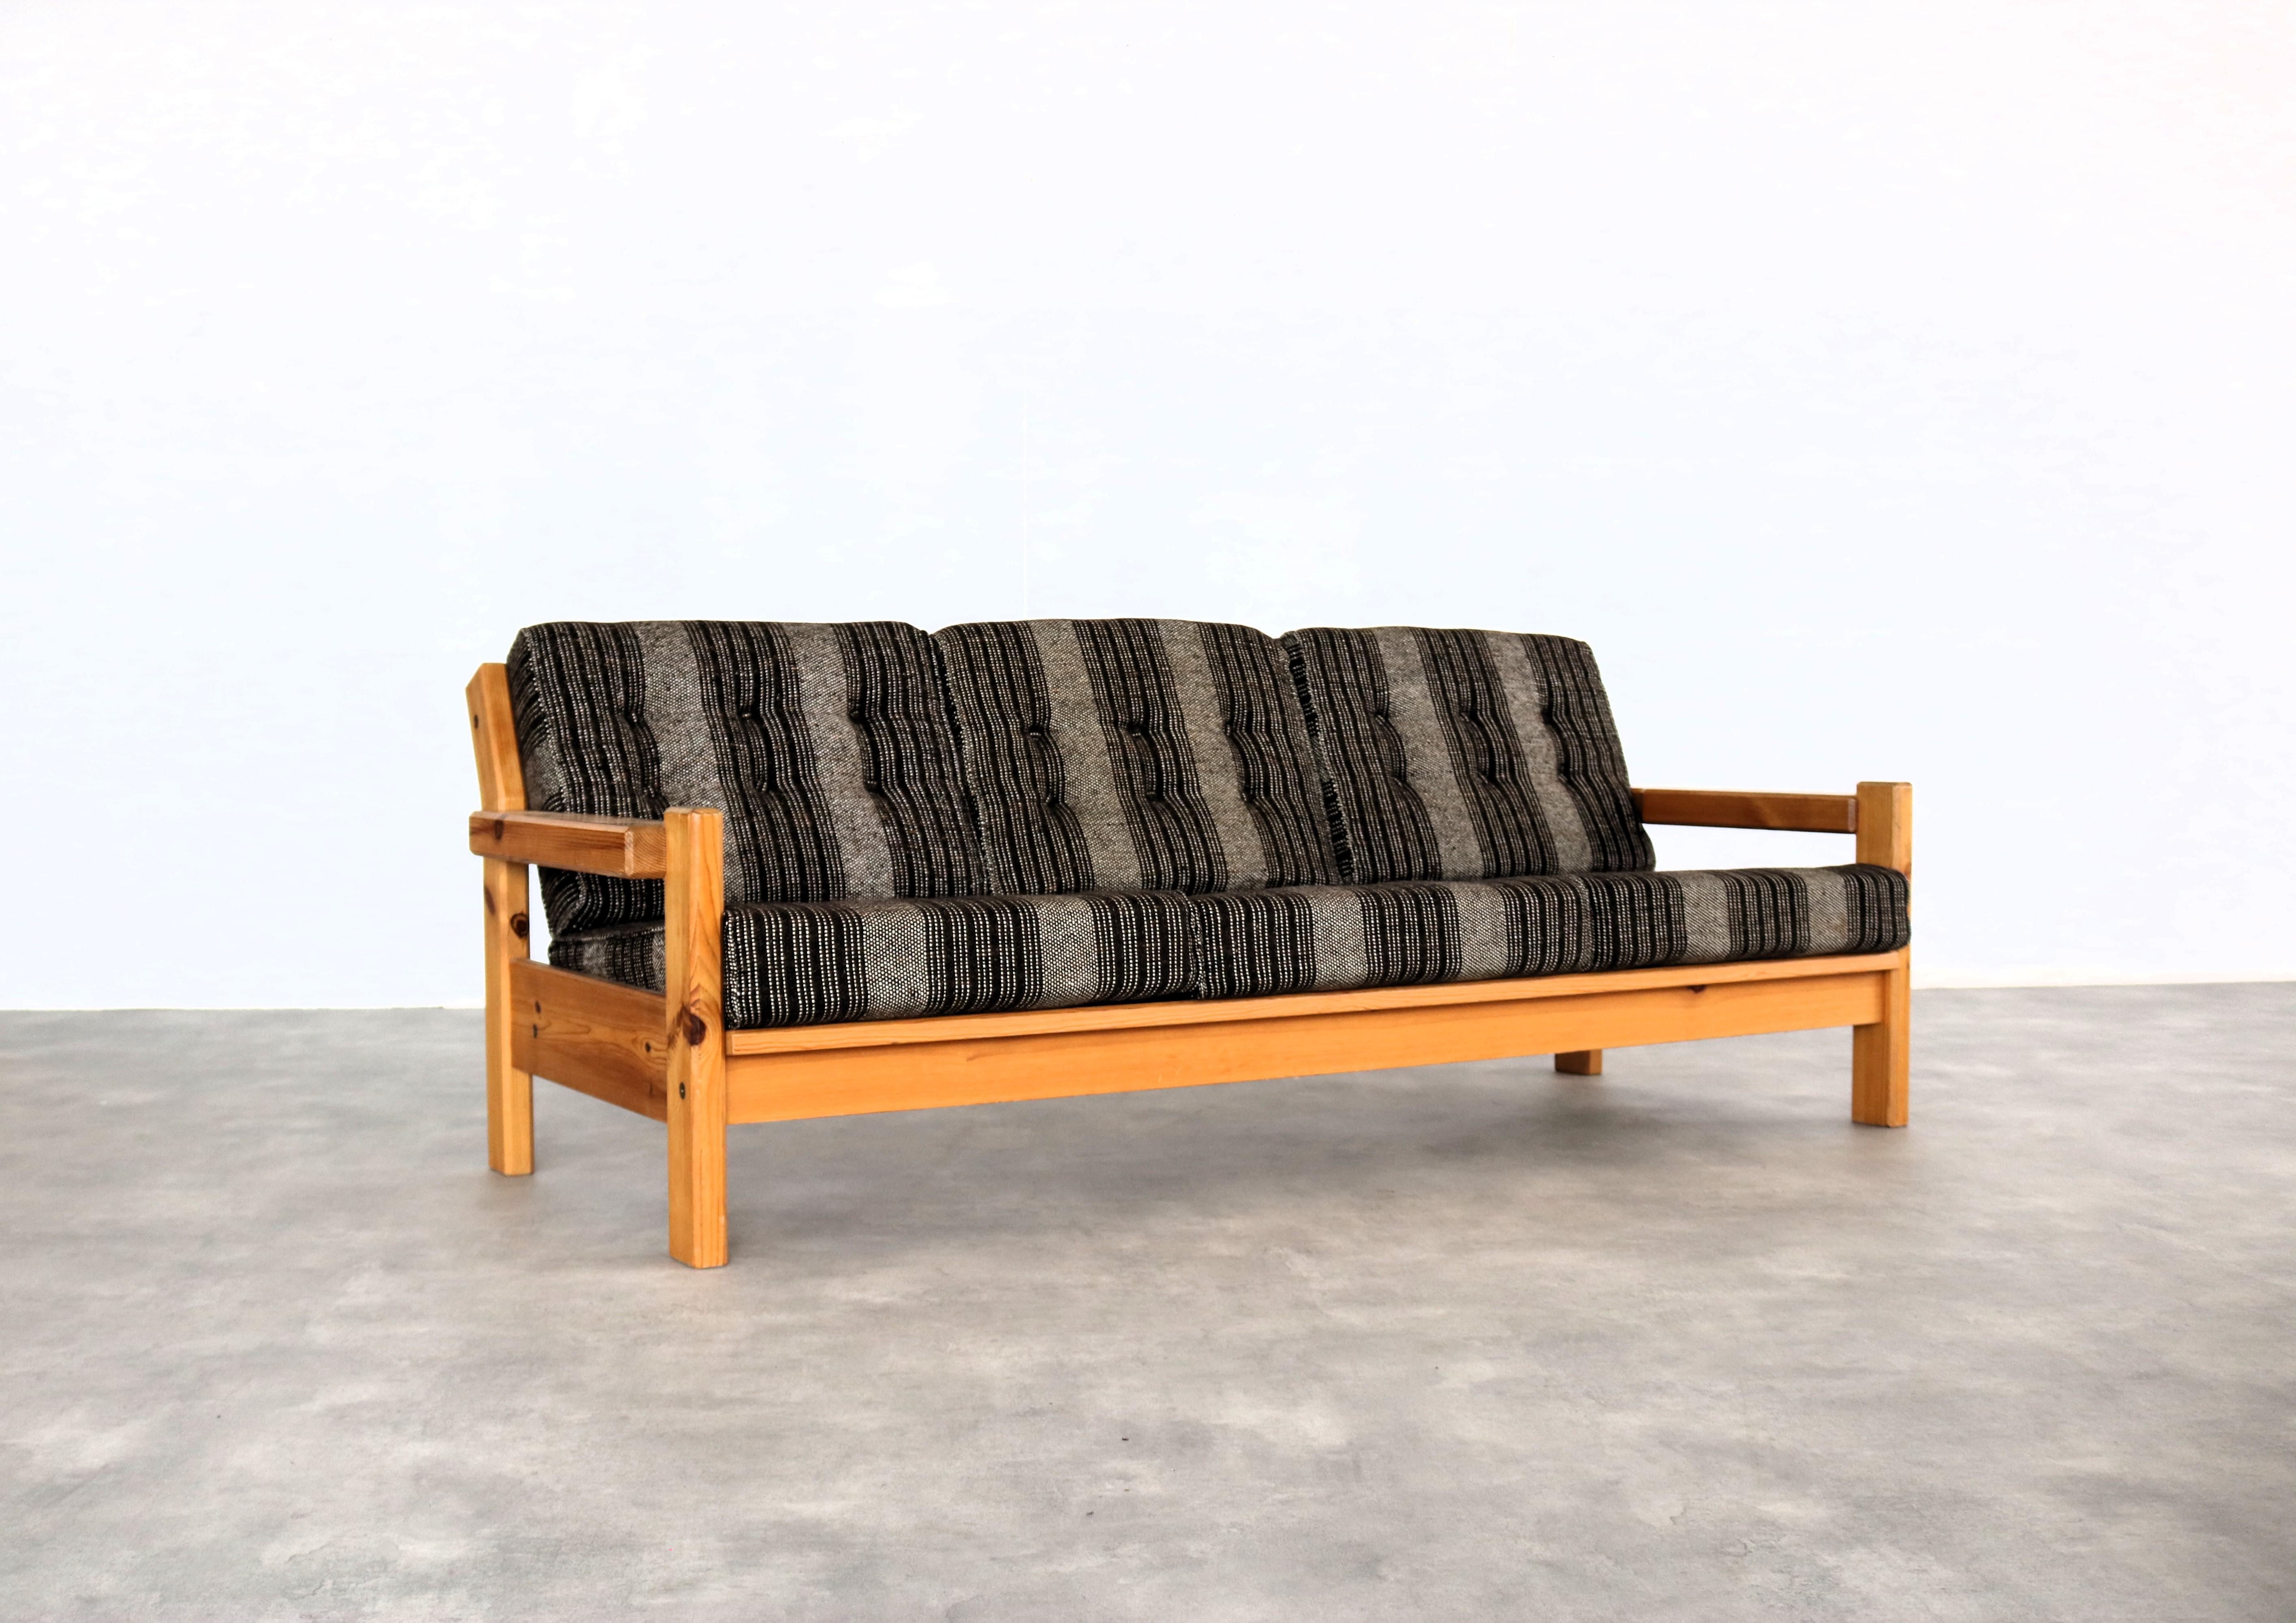 
vintage sofa | bank | 70's | Sweden

period | 60's
design | unknown | Sweden
condition | good | light signs of use
size | 72 x 195 x 85 (hxwxd) seat height 38 cm;

details | pine; textile; matching armchairs available;

article number | 2195